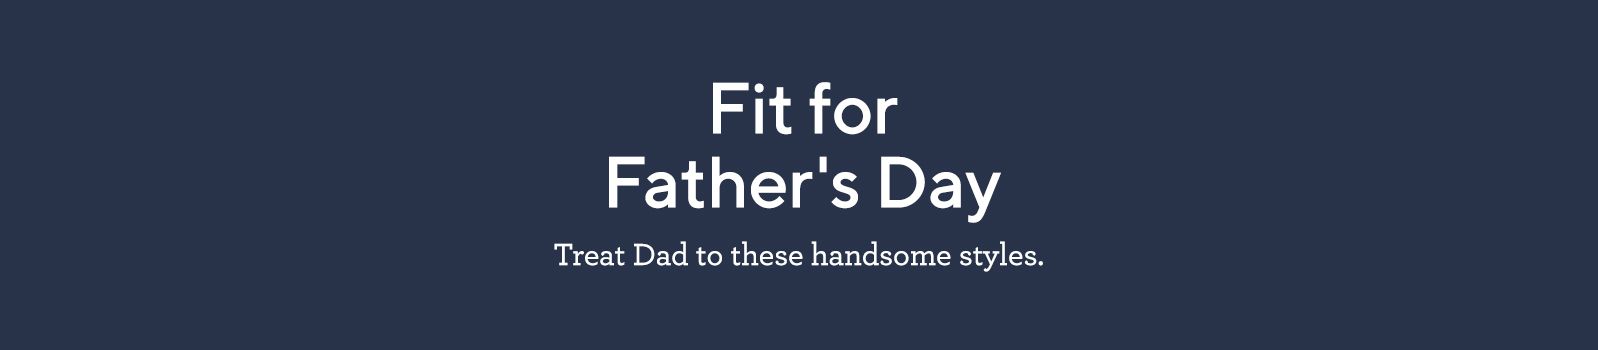 Fit for Father's Day: Treat Dad to these handsome styles.